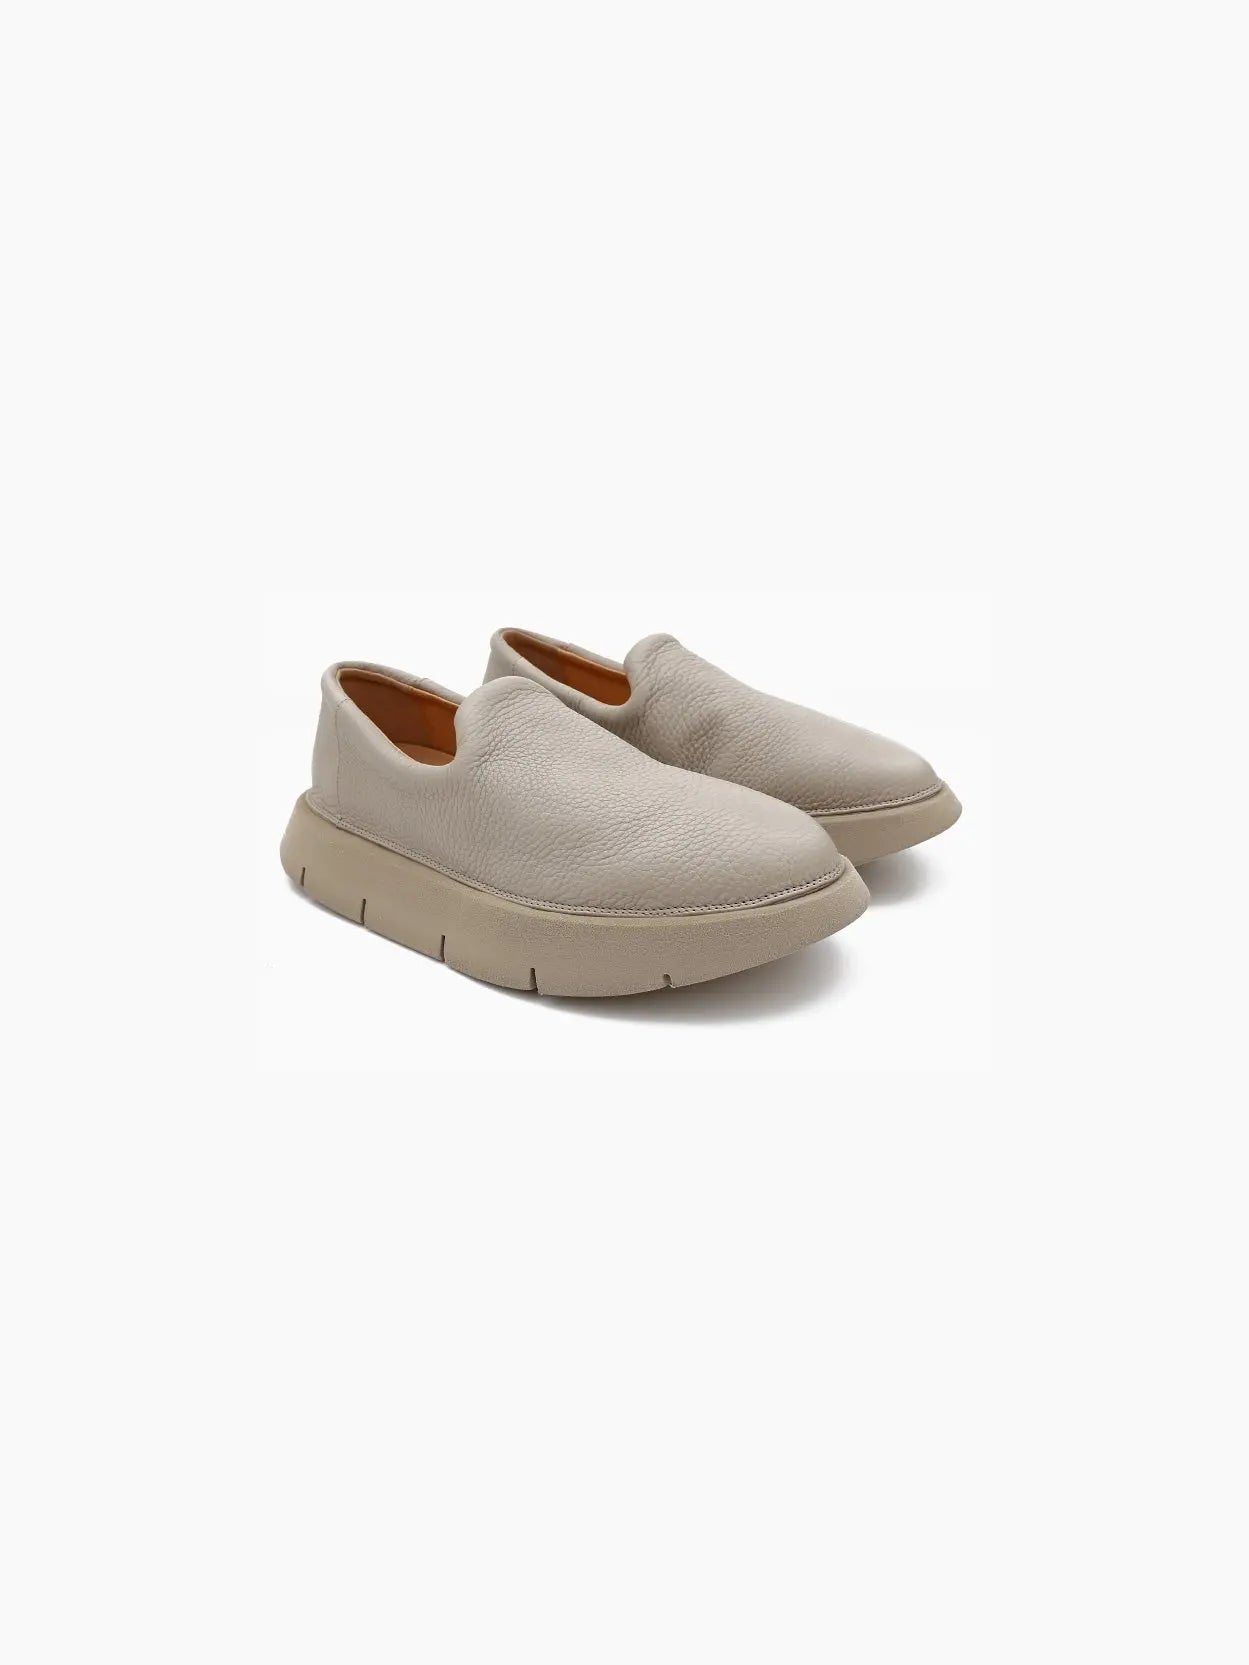 A single beige Intagliata Slip On Clay by Marsèll with a smooth, rounded toe and a slightly flared, chunky sole. The segmented design of the sole ensures flexibility. With its minimalist and modern appearance, this shoe stands out in any setting. Available now at bassalstore in Barcelona. The background is white.